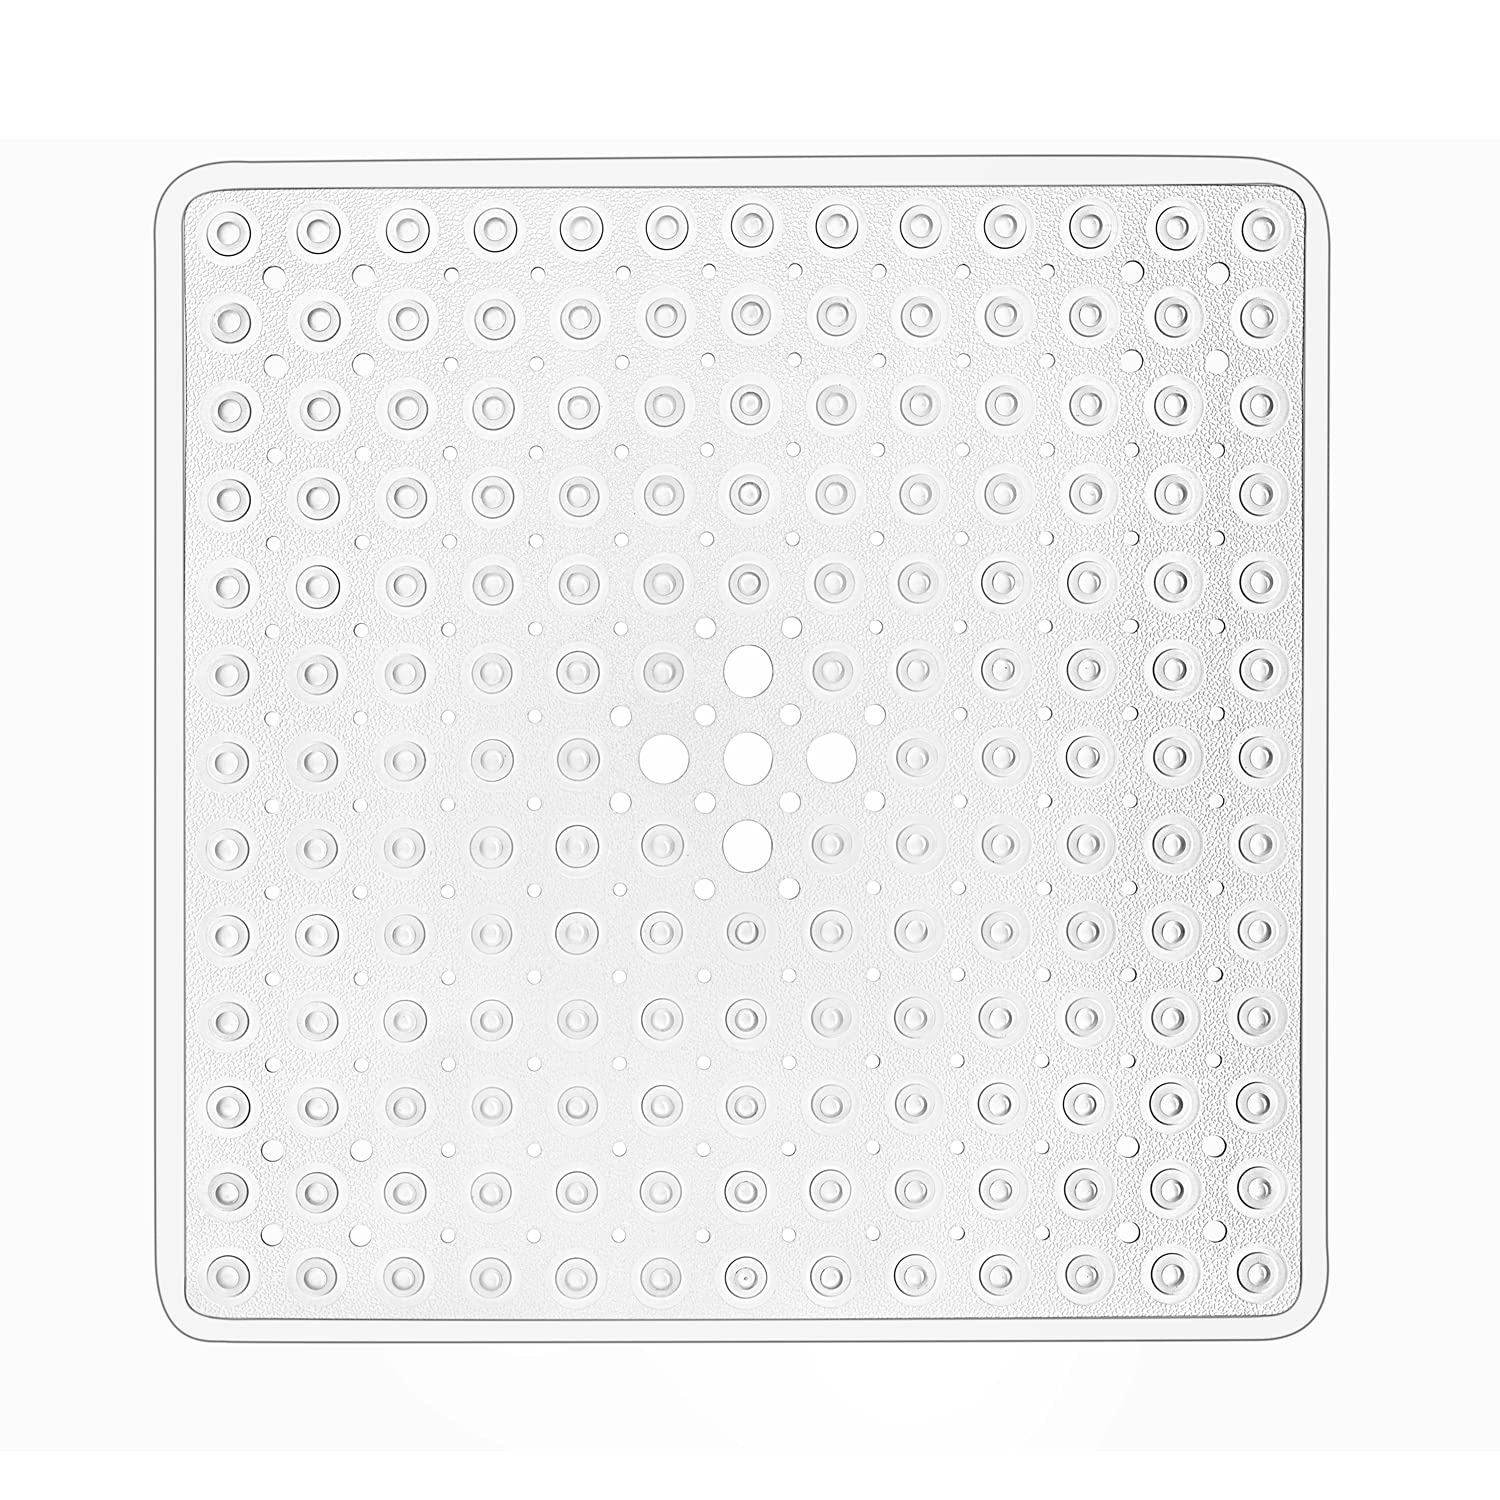 Large Square Shower Mat Non Slip - Shower Mat with Drain Hole in